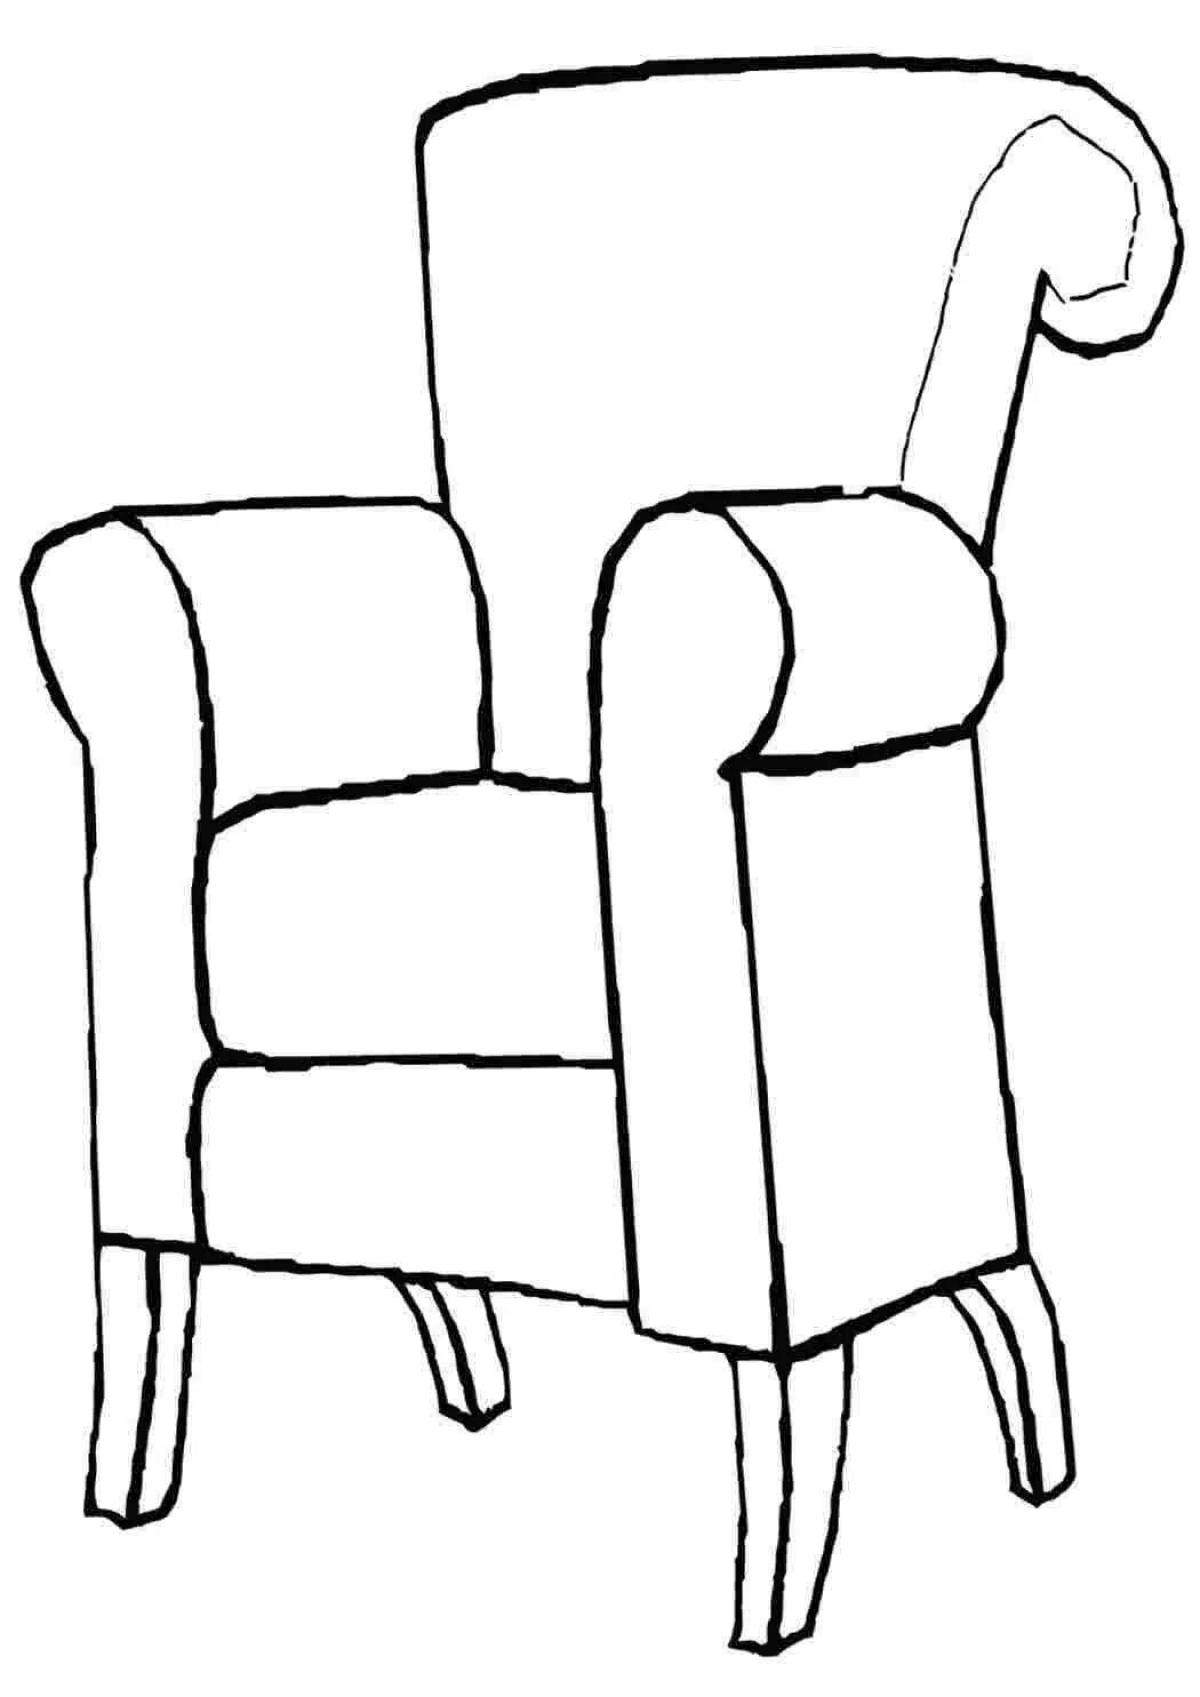 Coloring book magic chair for children